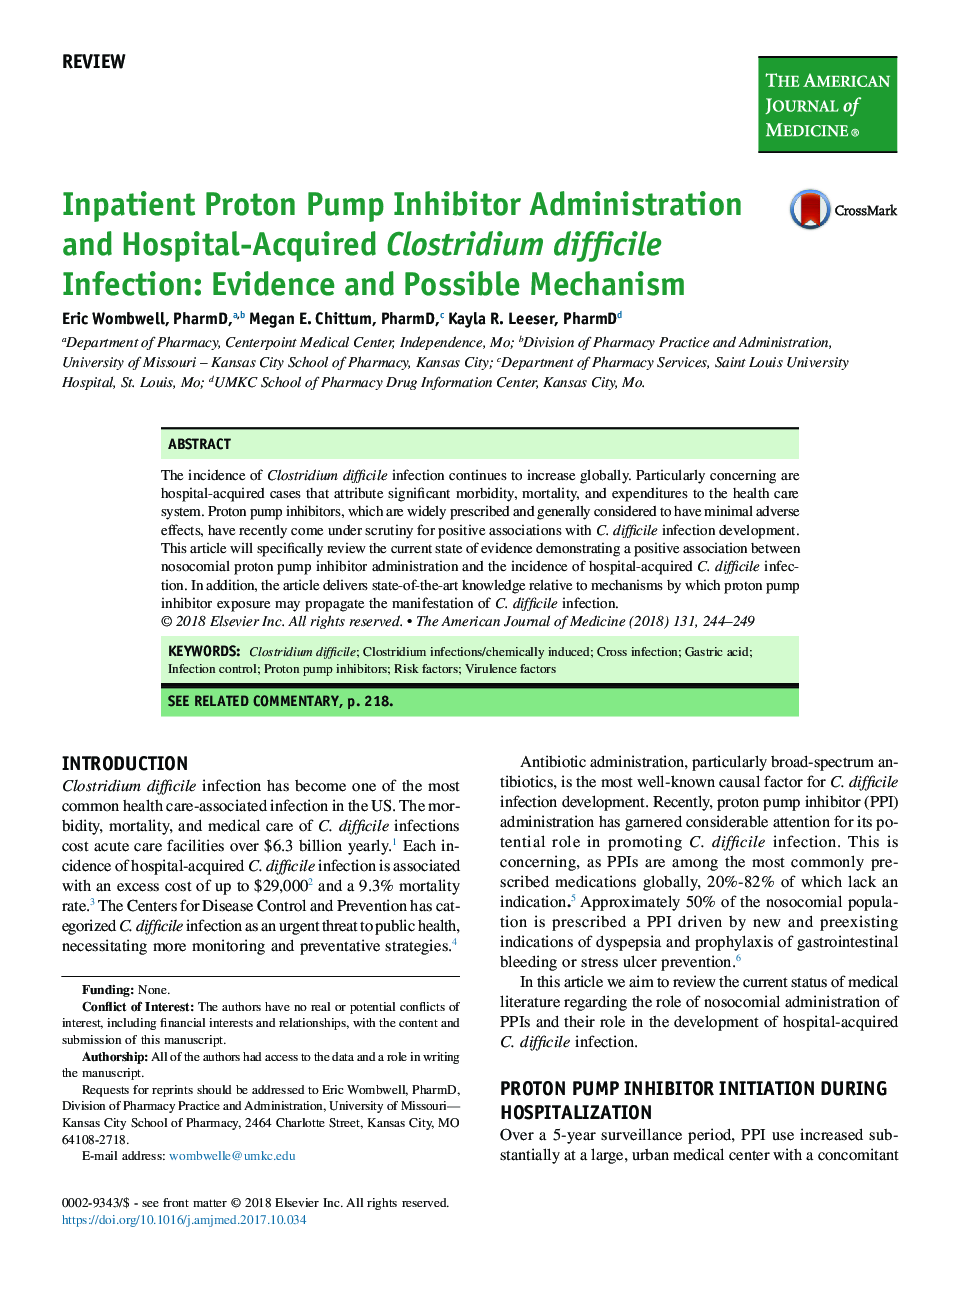 Inpatient Proton Pump Inhibitor Administration and Hospital-Acquired Clostridium difficile Infection: Evidence and Possible Mechanism